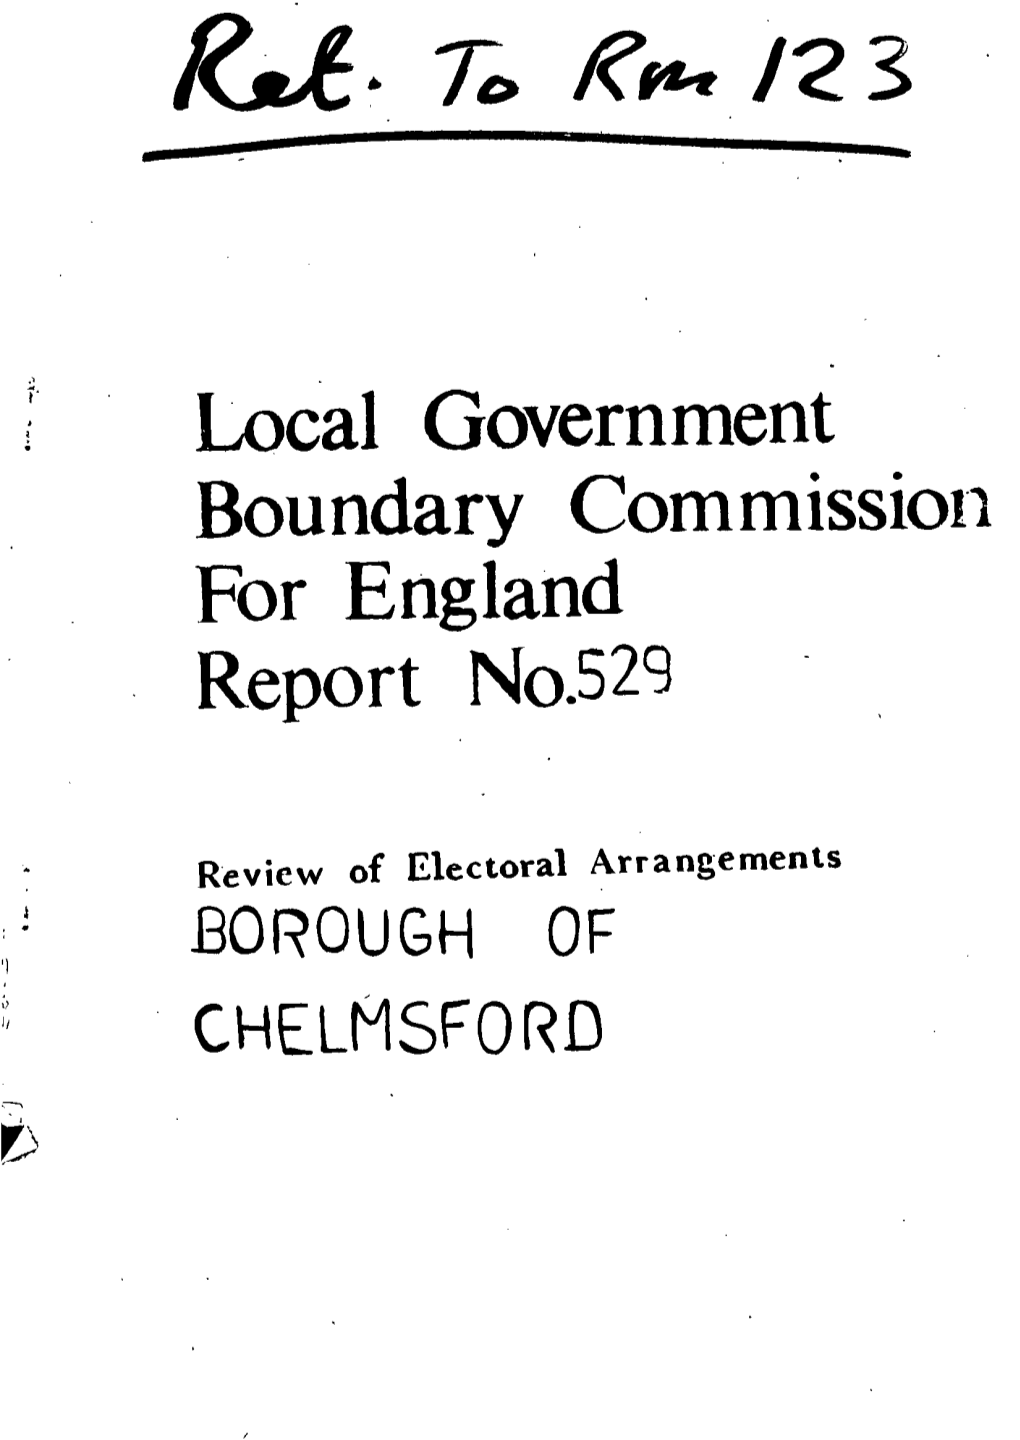 Local Government Boundary Commission for England Report No.529